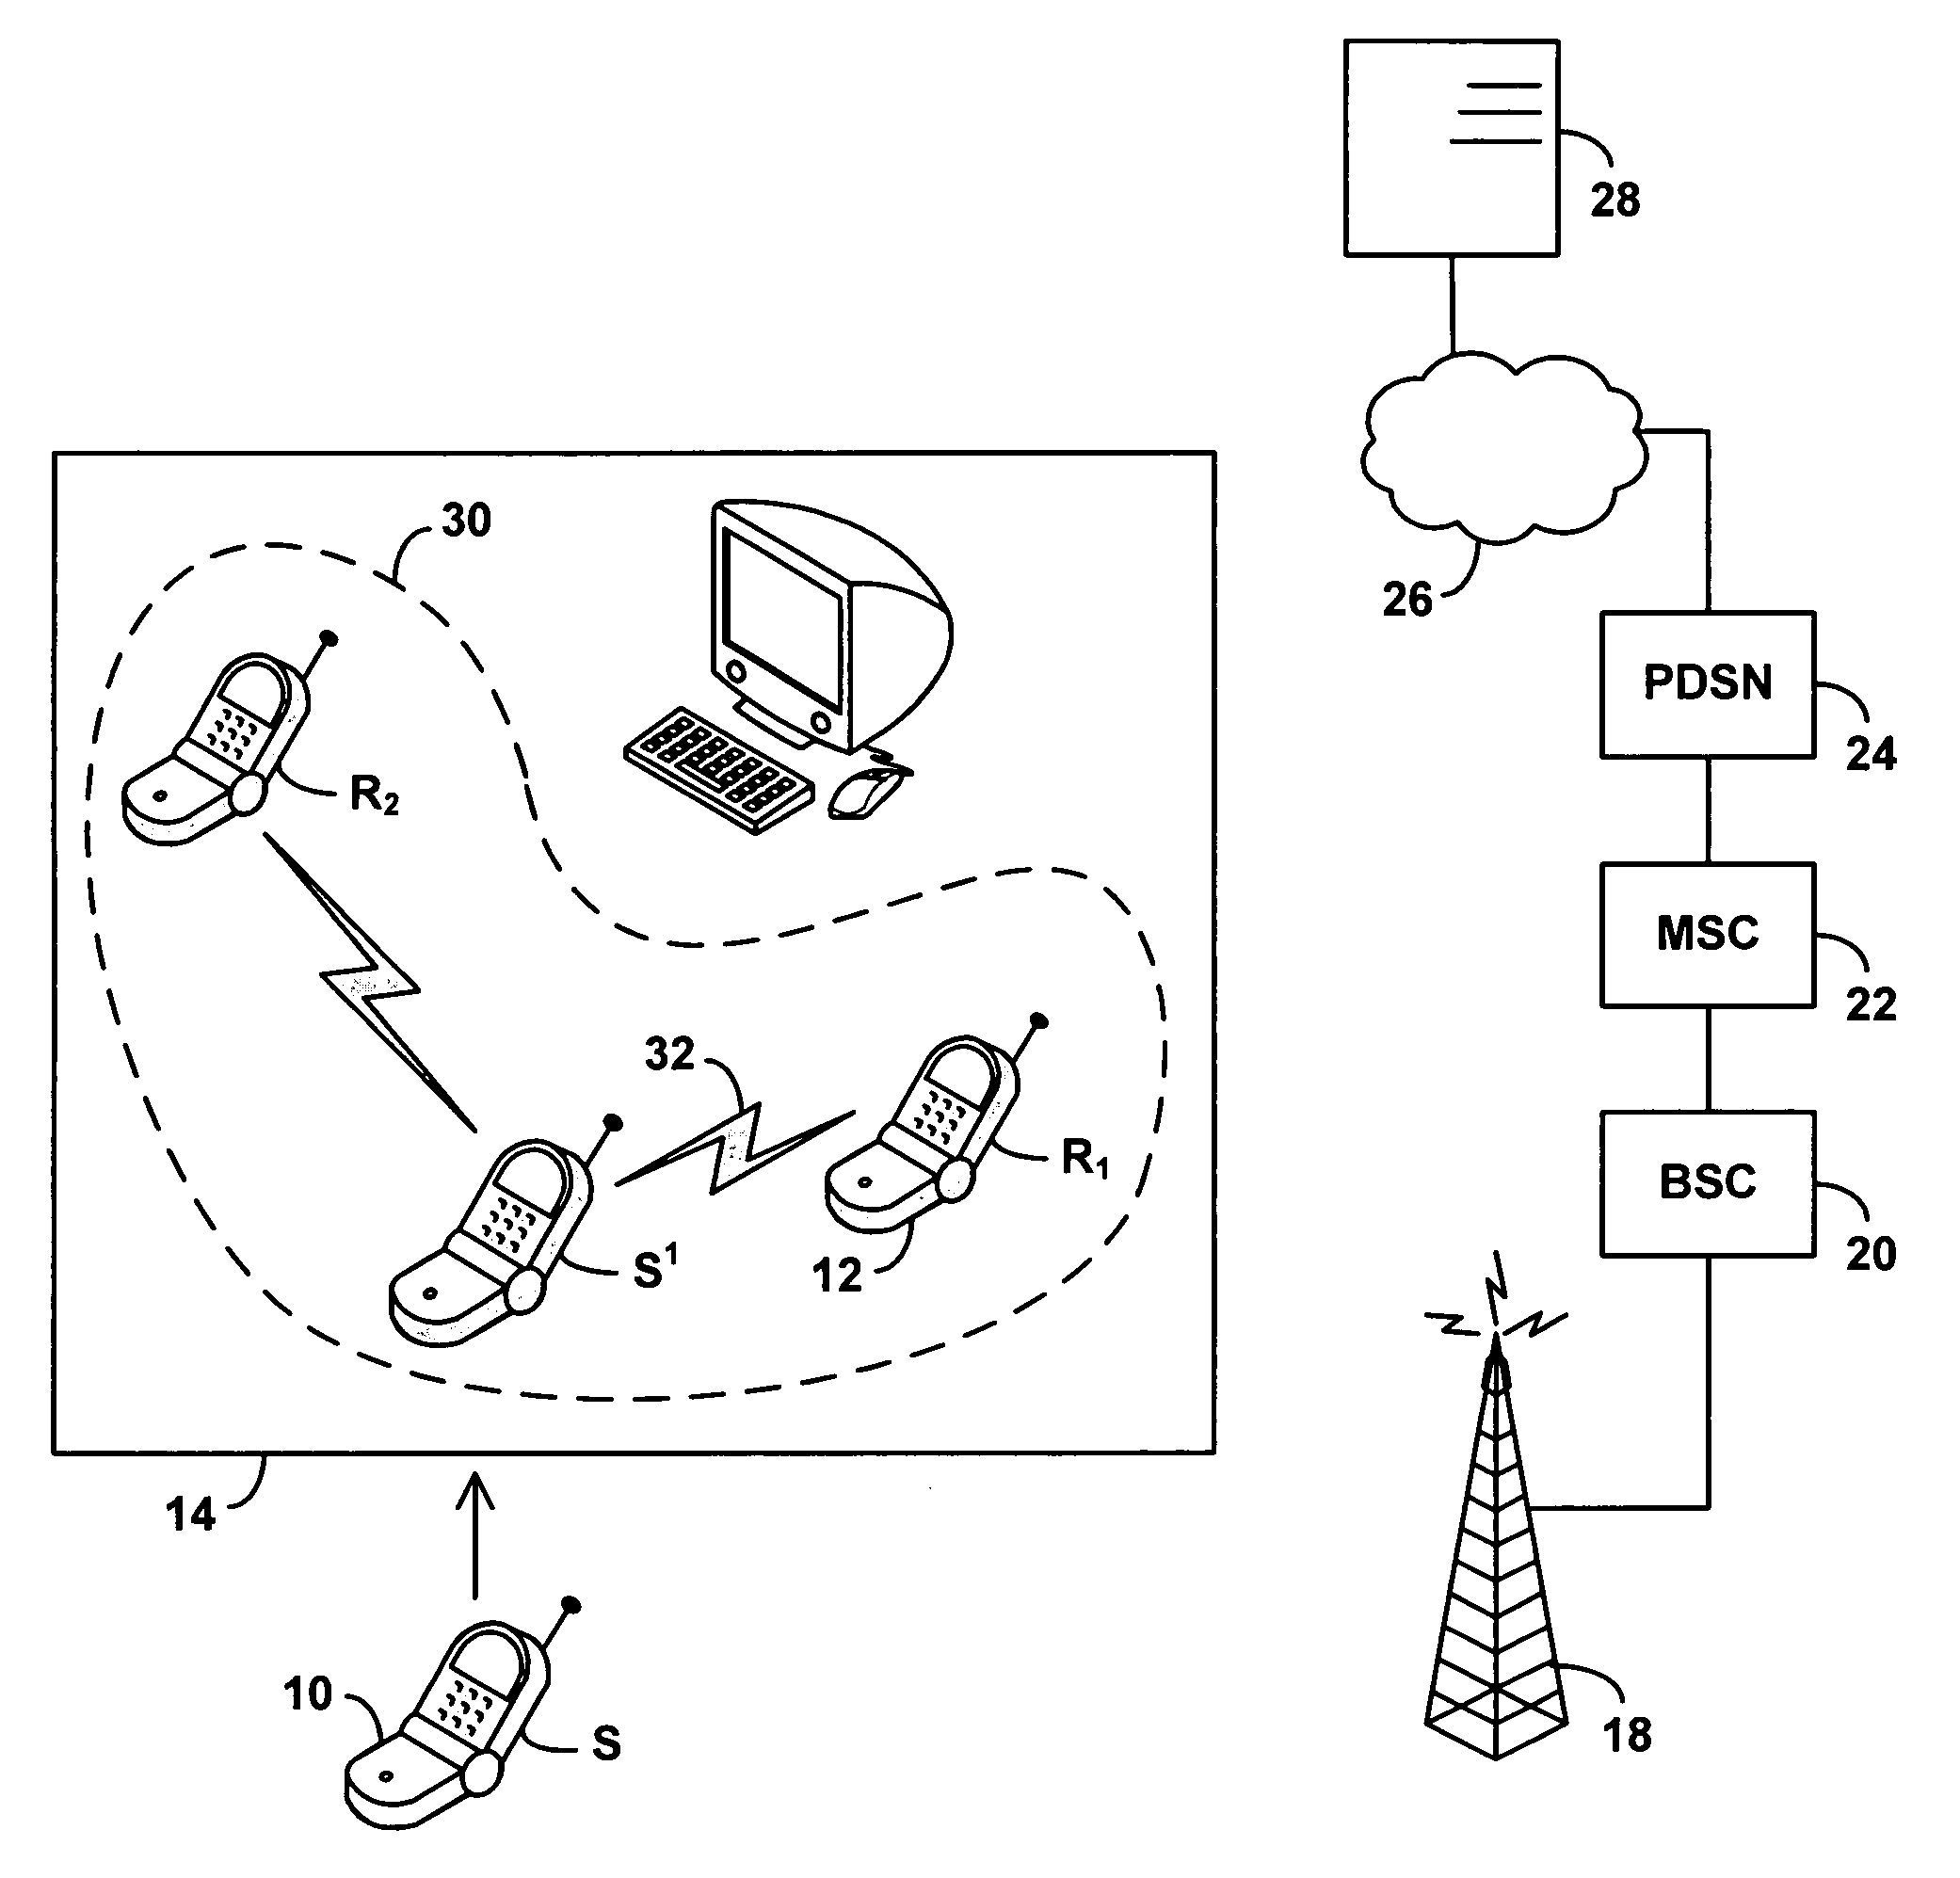 Multimodal wireless communication device with user selection of transceiver mode via dialing string